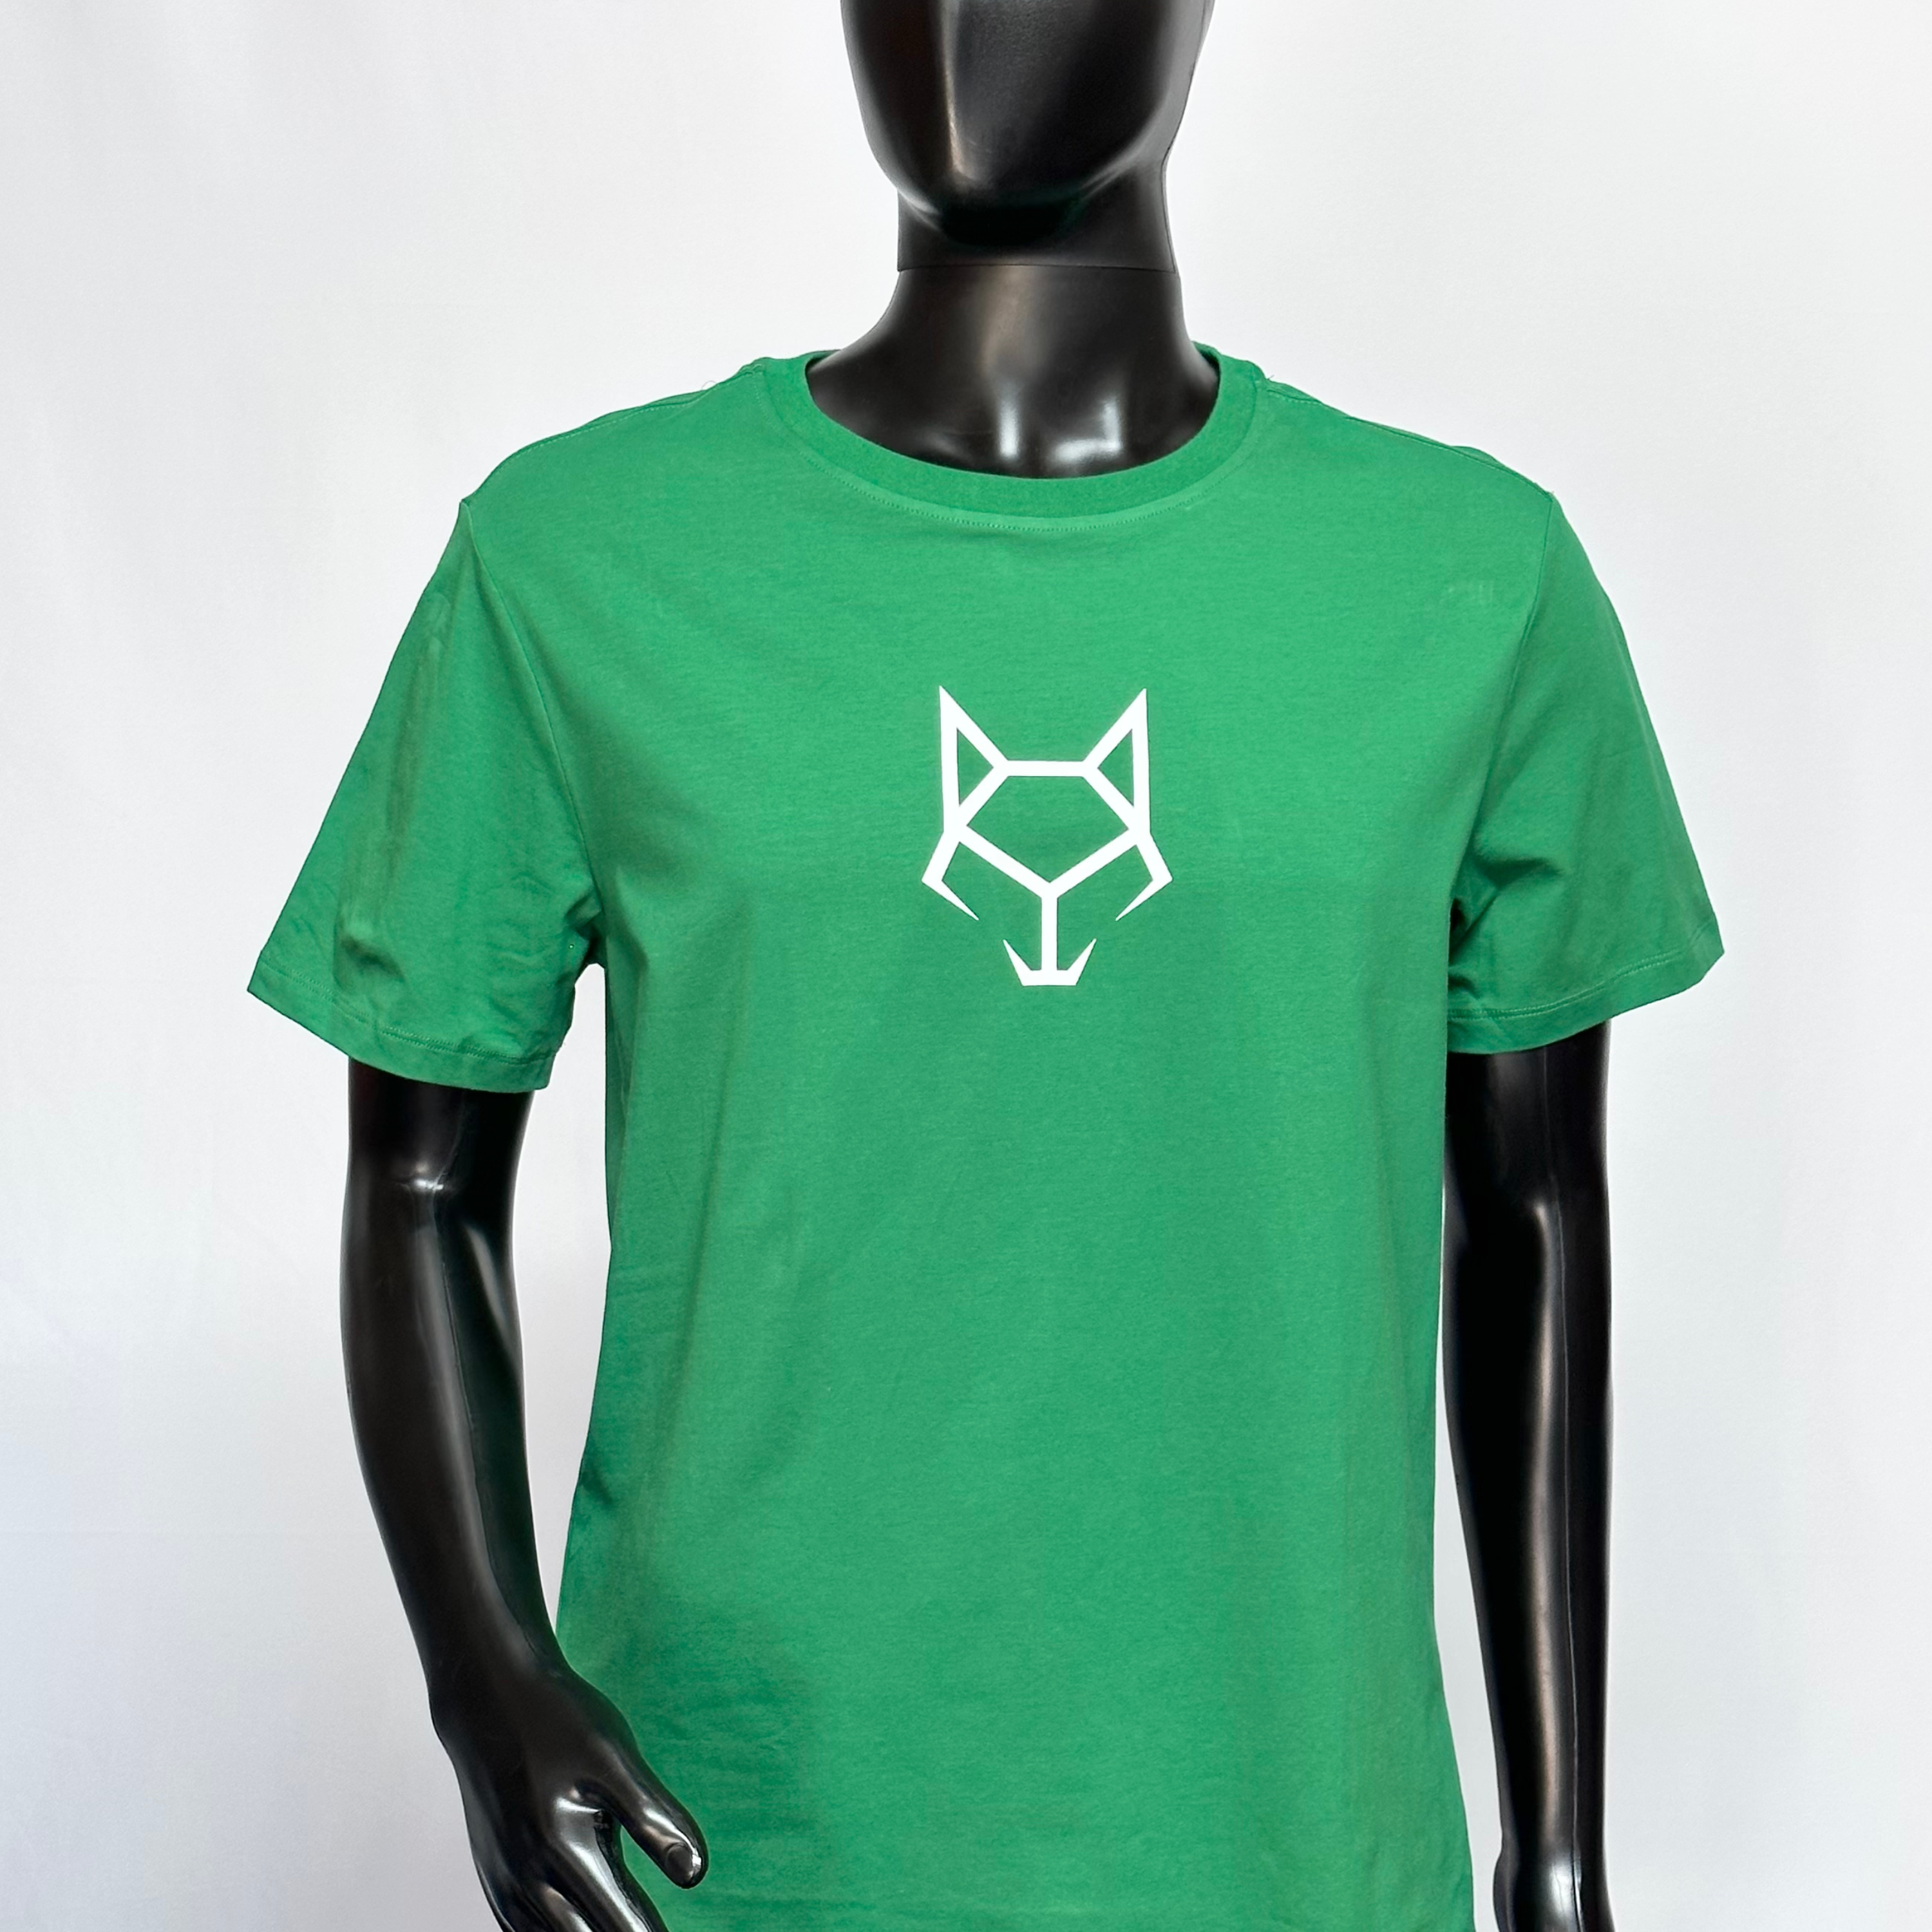 Indulge in the rich green Men's Short Sleeved Crew-Neck T-Shirt, a wardrobe essential that seamlessly combines comfort, style, and iconic branding.